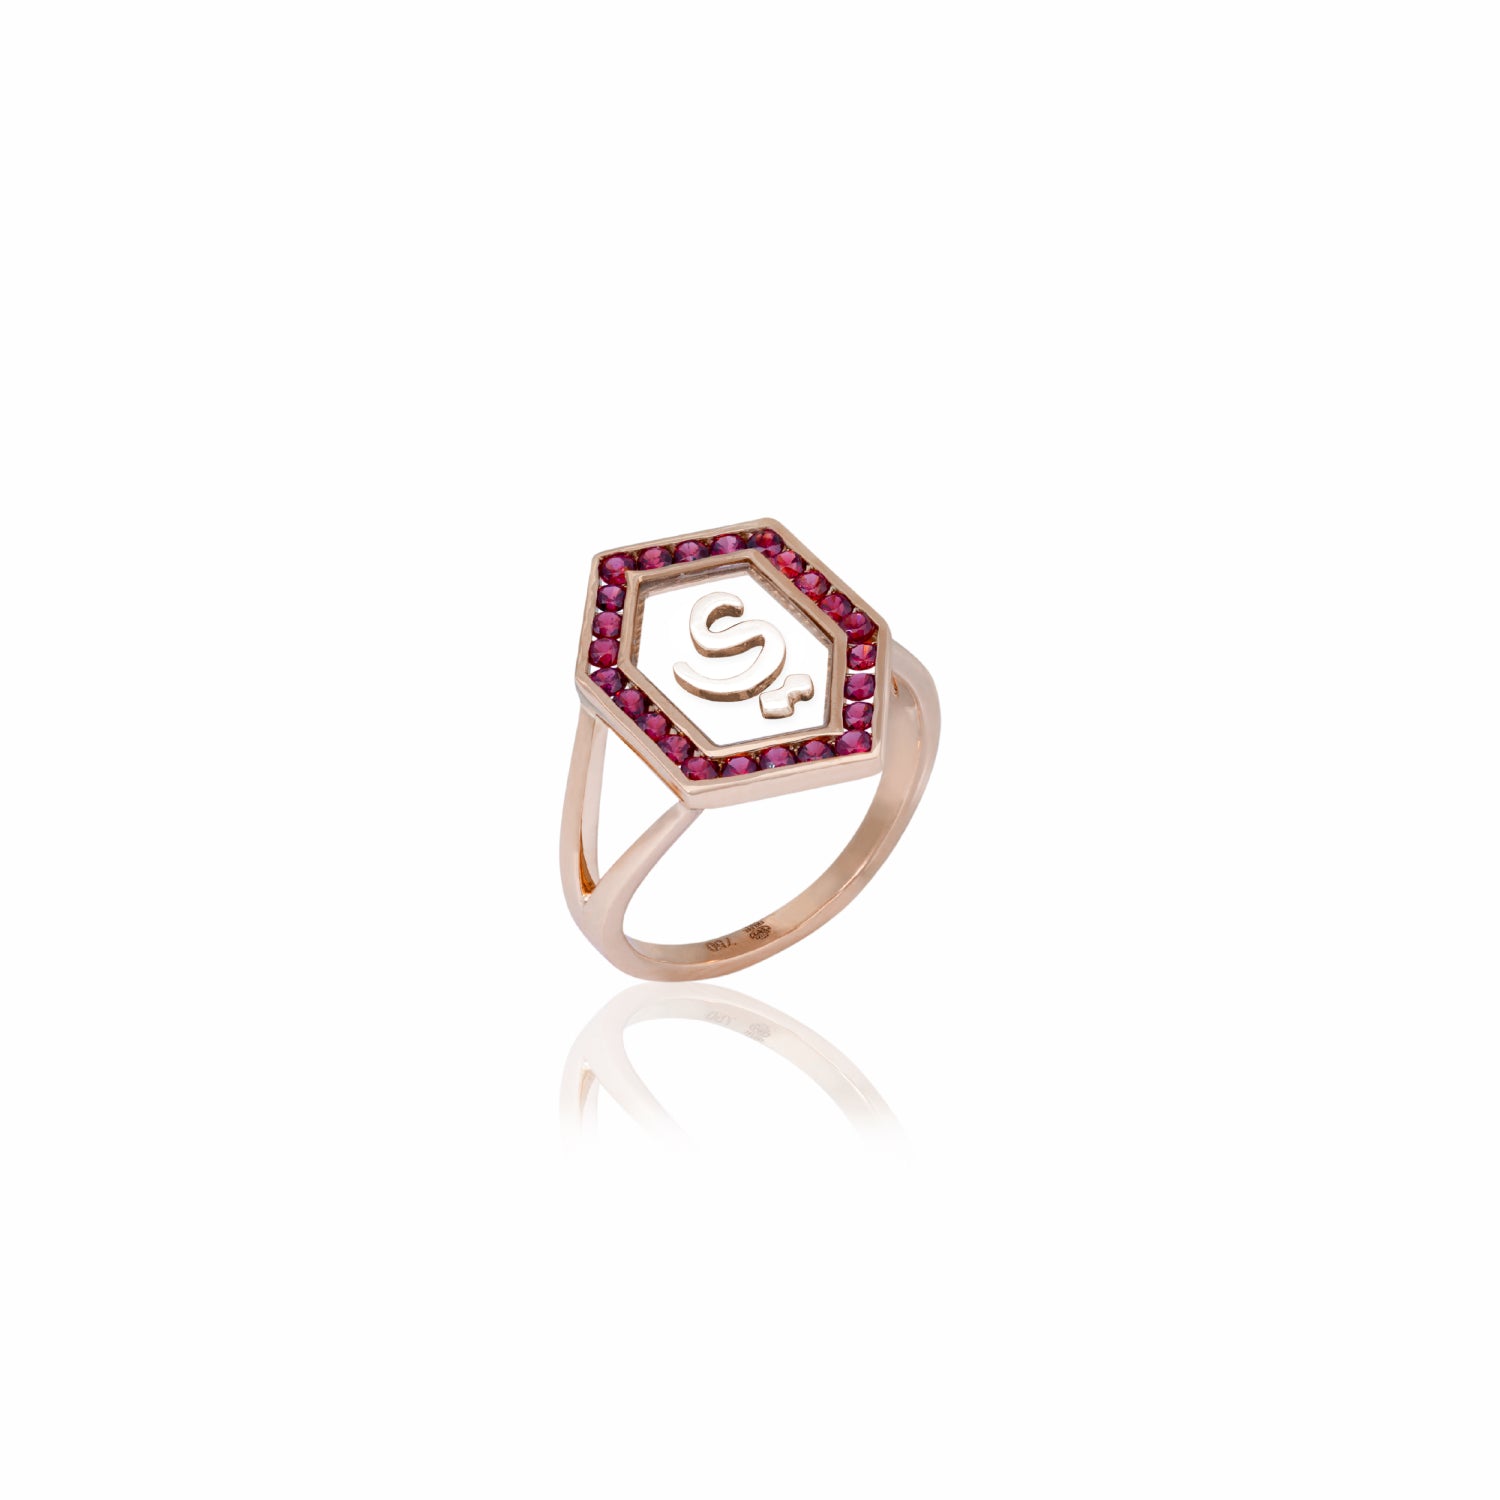 Qamoos 1.0 Letter ي Ruby Ring in Rose Gold